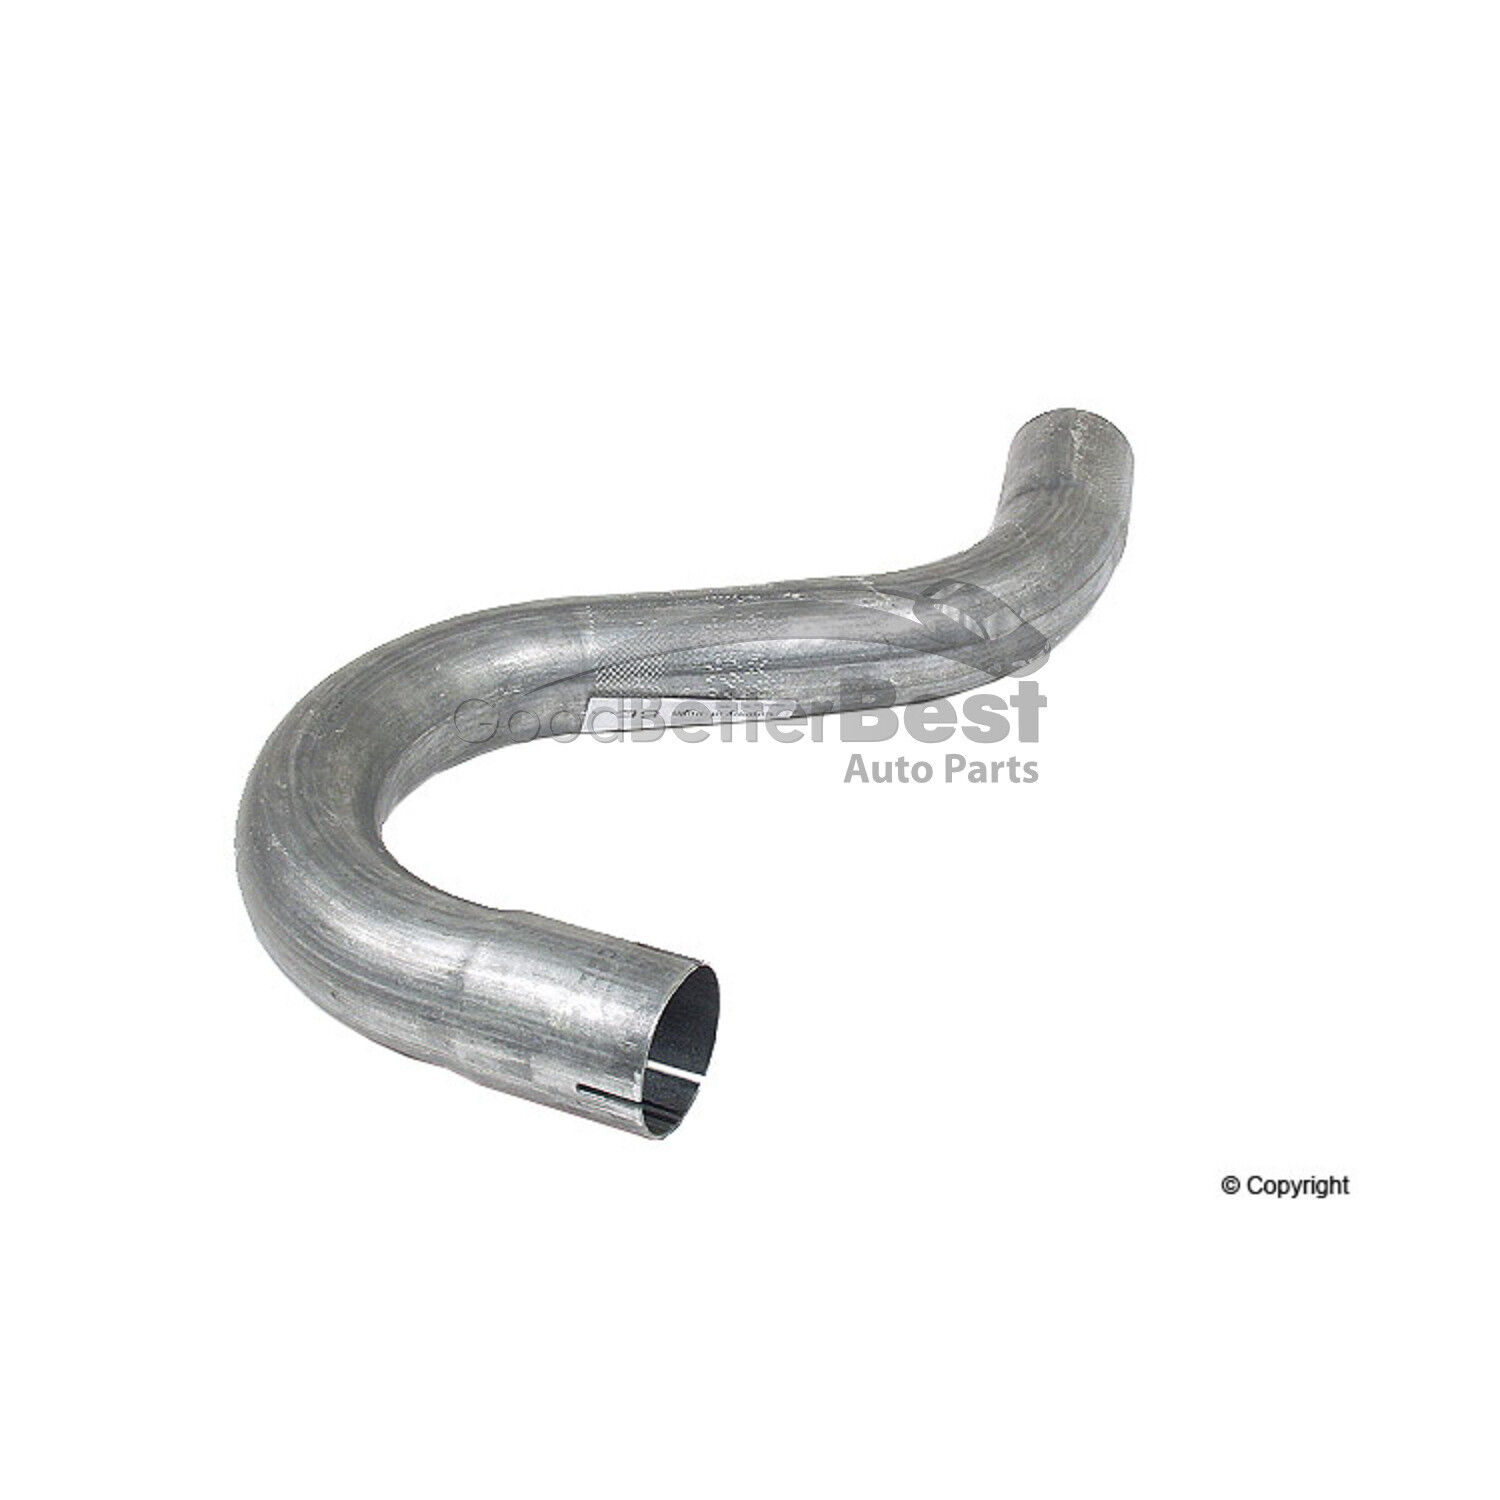 One New Starla Exhaust Pipe 13364 1378535 for Volvo 740 760